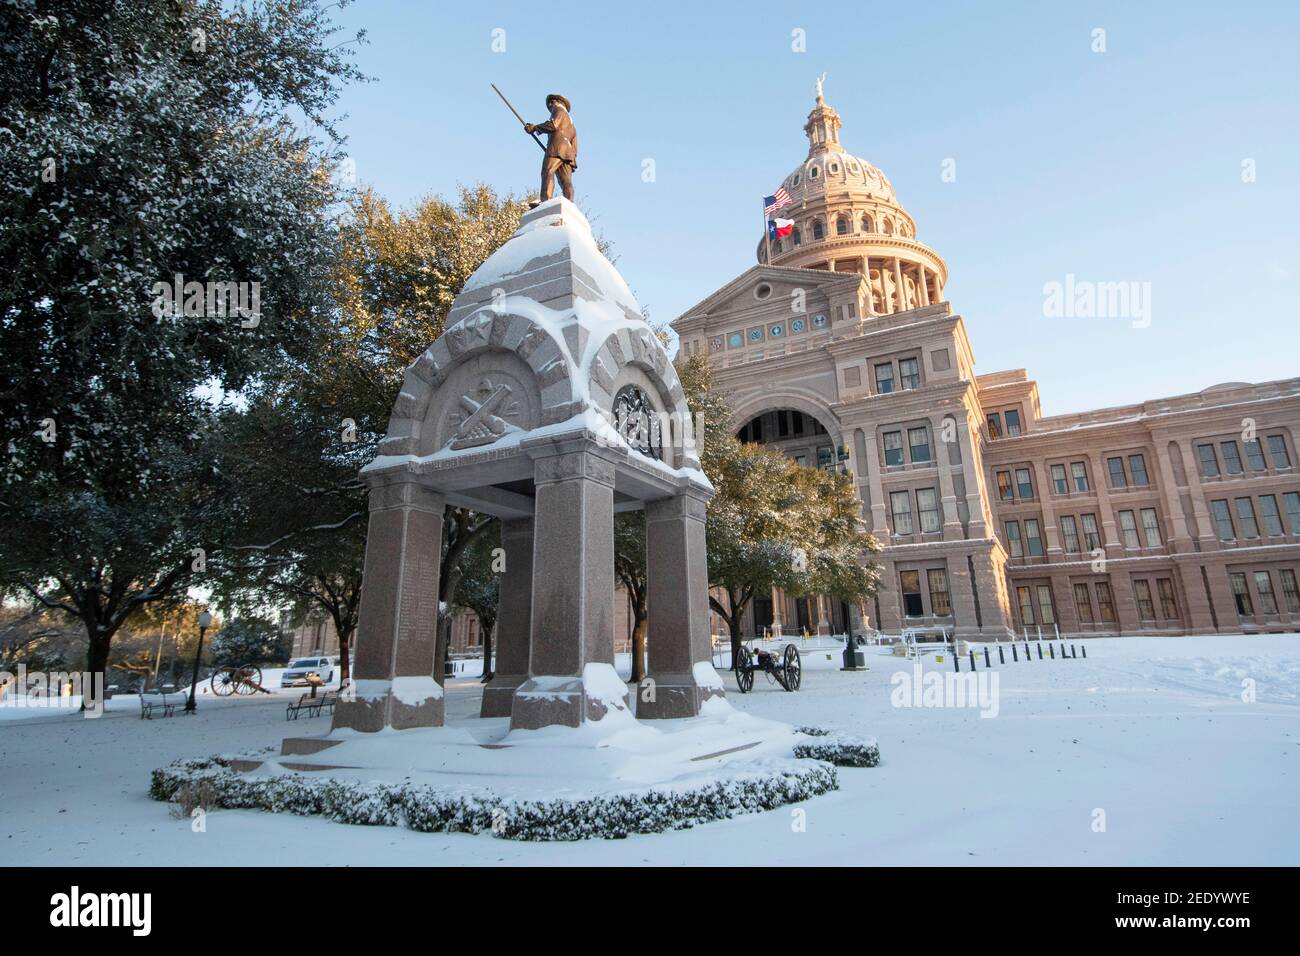 Austin, Texas USA Feb 15, 2021: The Texas Capitol grounds, including the Heroes of the Alamo monument, are covered in 6-7 inches of rare snowfall Monday morning after an overnight winter storm blew into central Texas. Most offices and schools are closed until warmer weather arrives later in the week. Credit: Bob Daemmrich/Alamy Live News Stock Photo